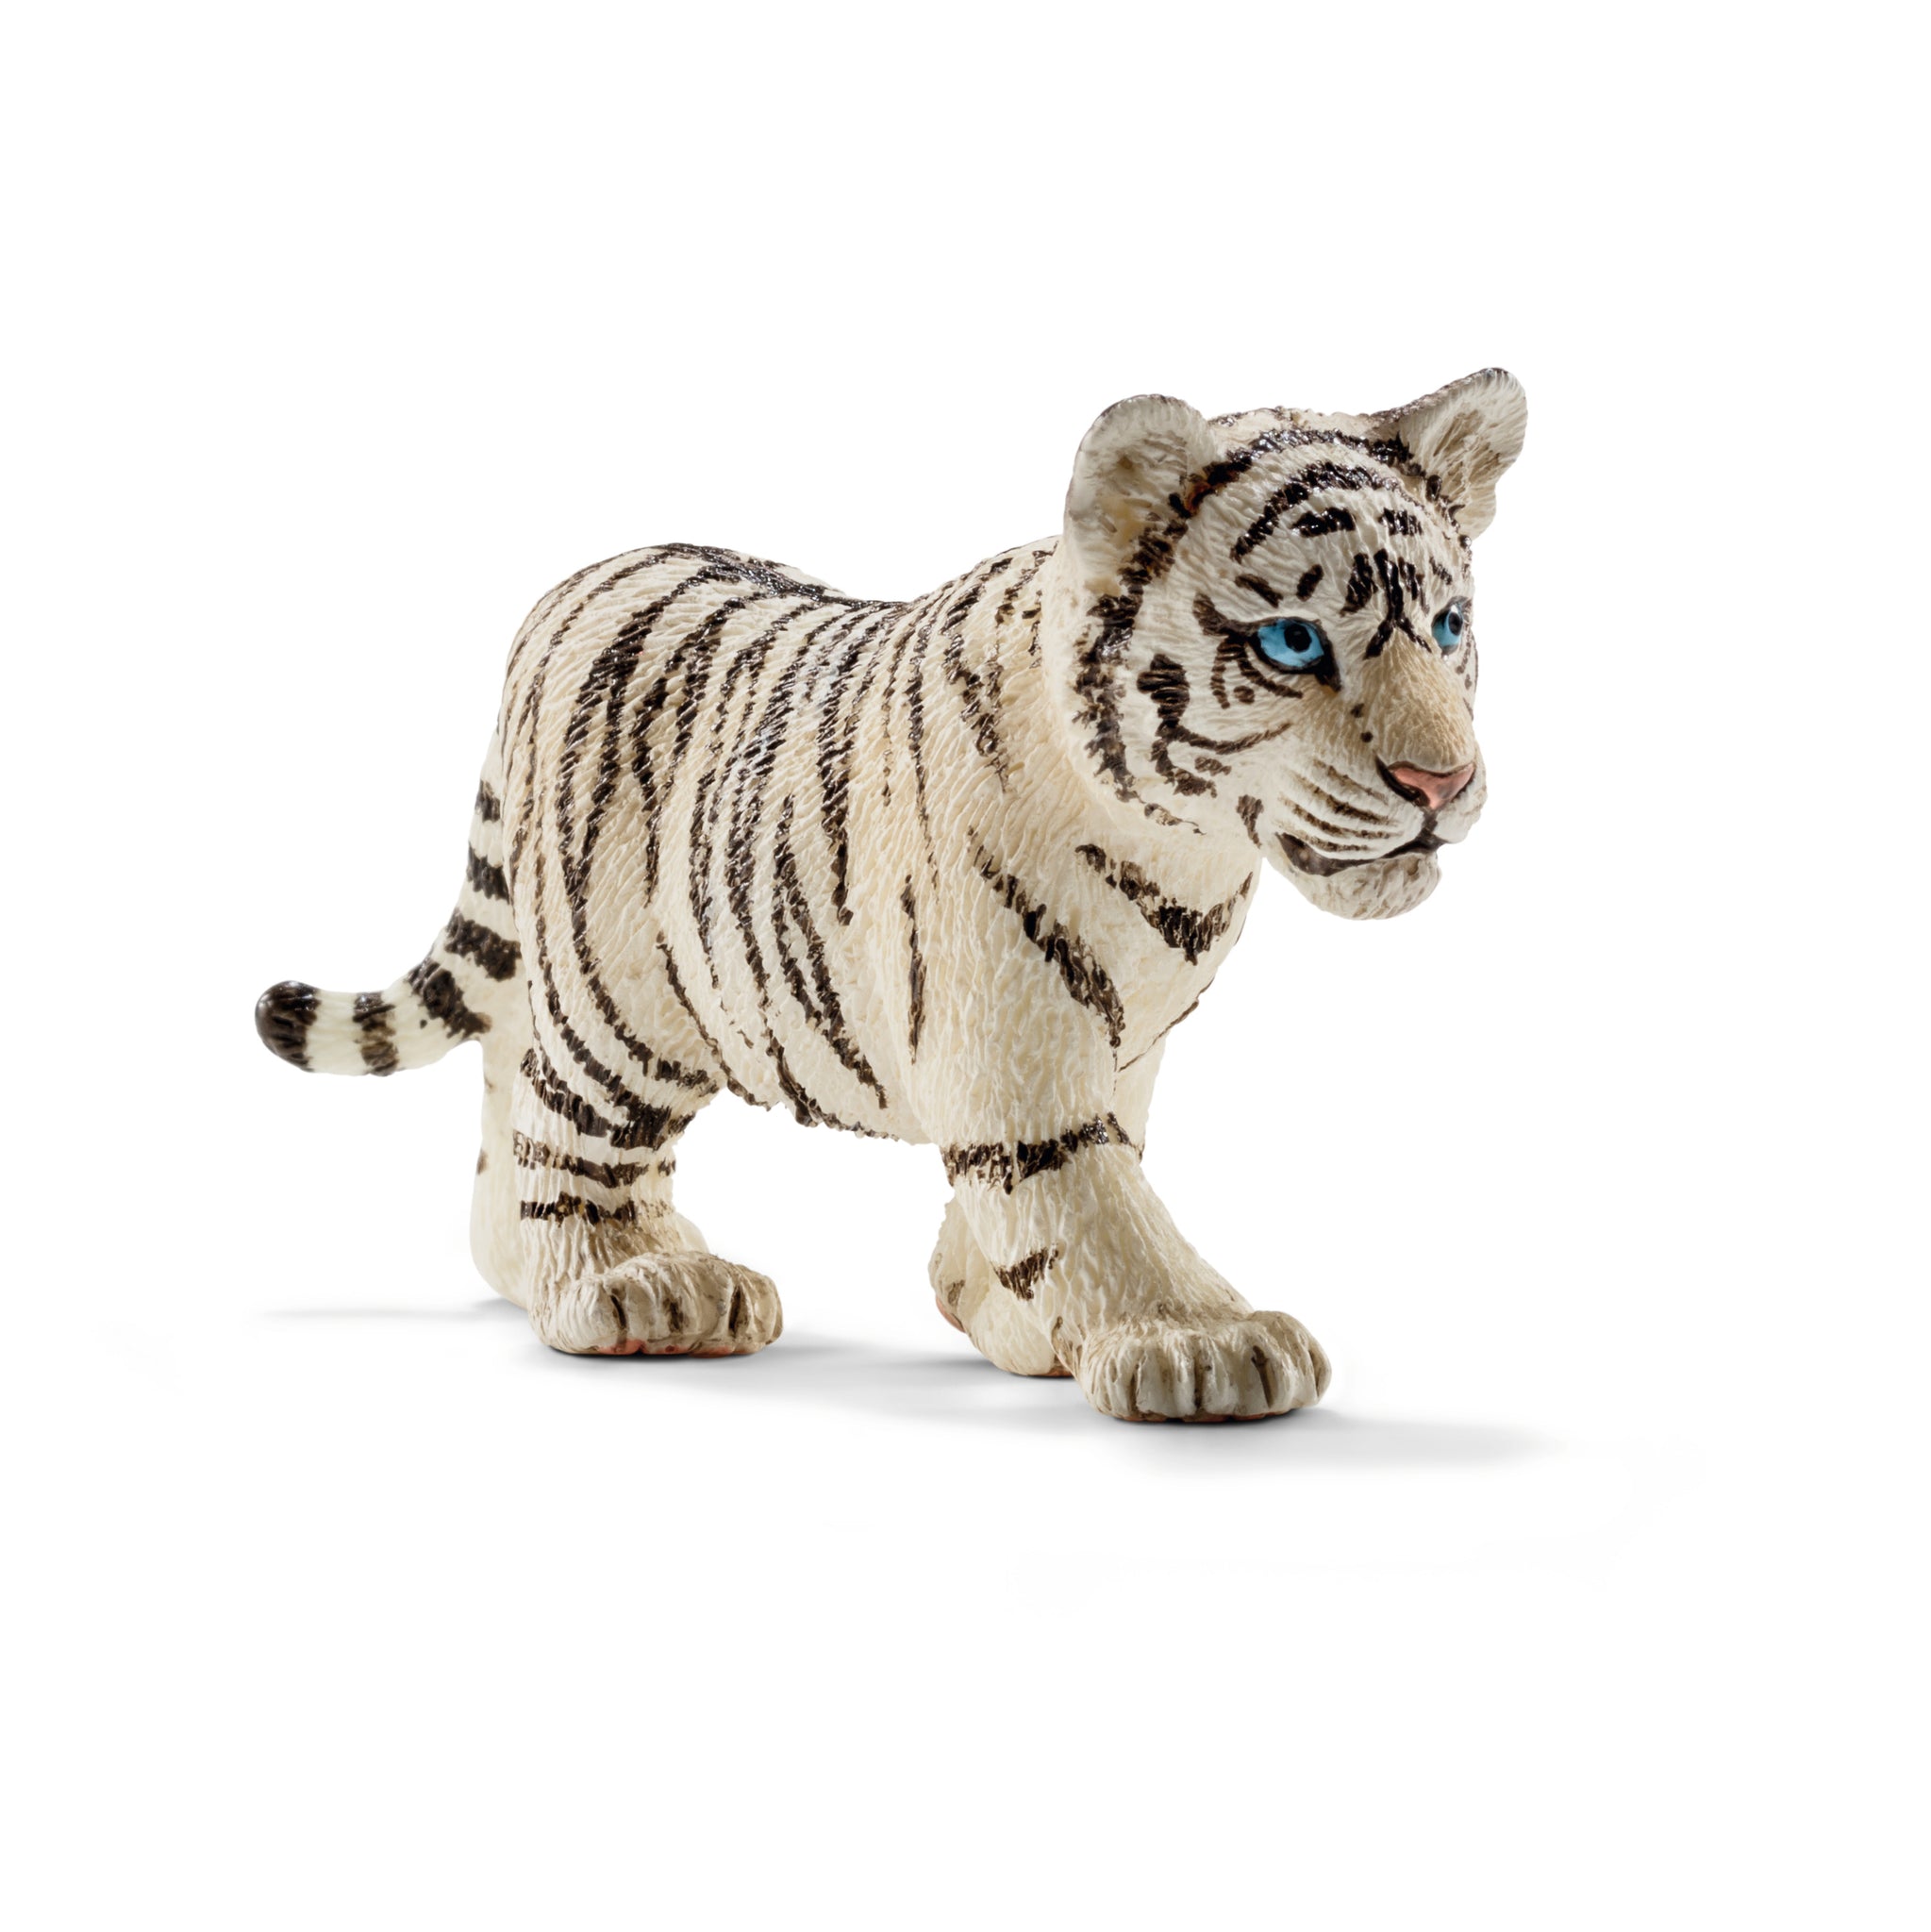 Tiger Cub, White - Ages 3+